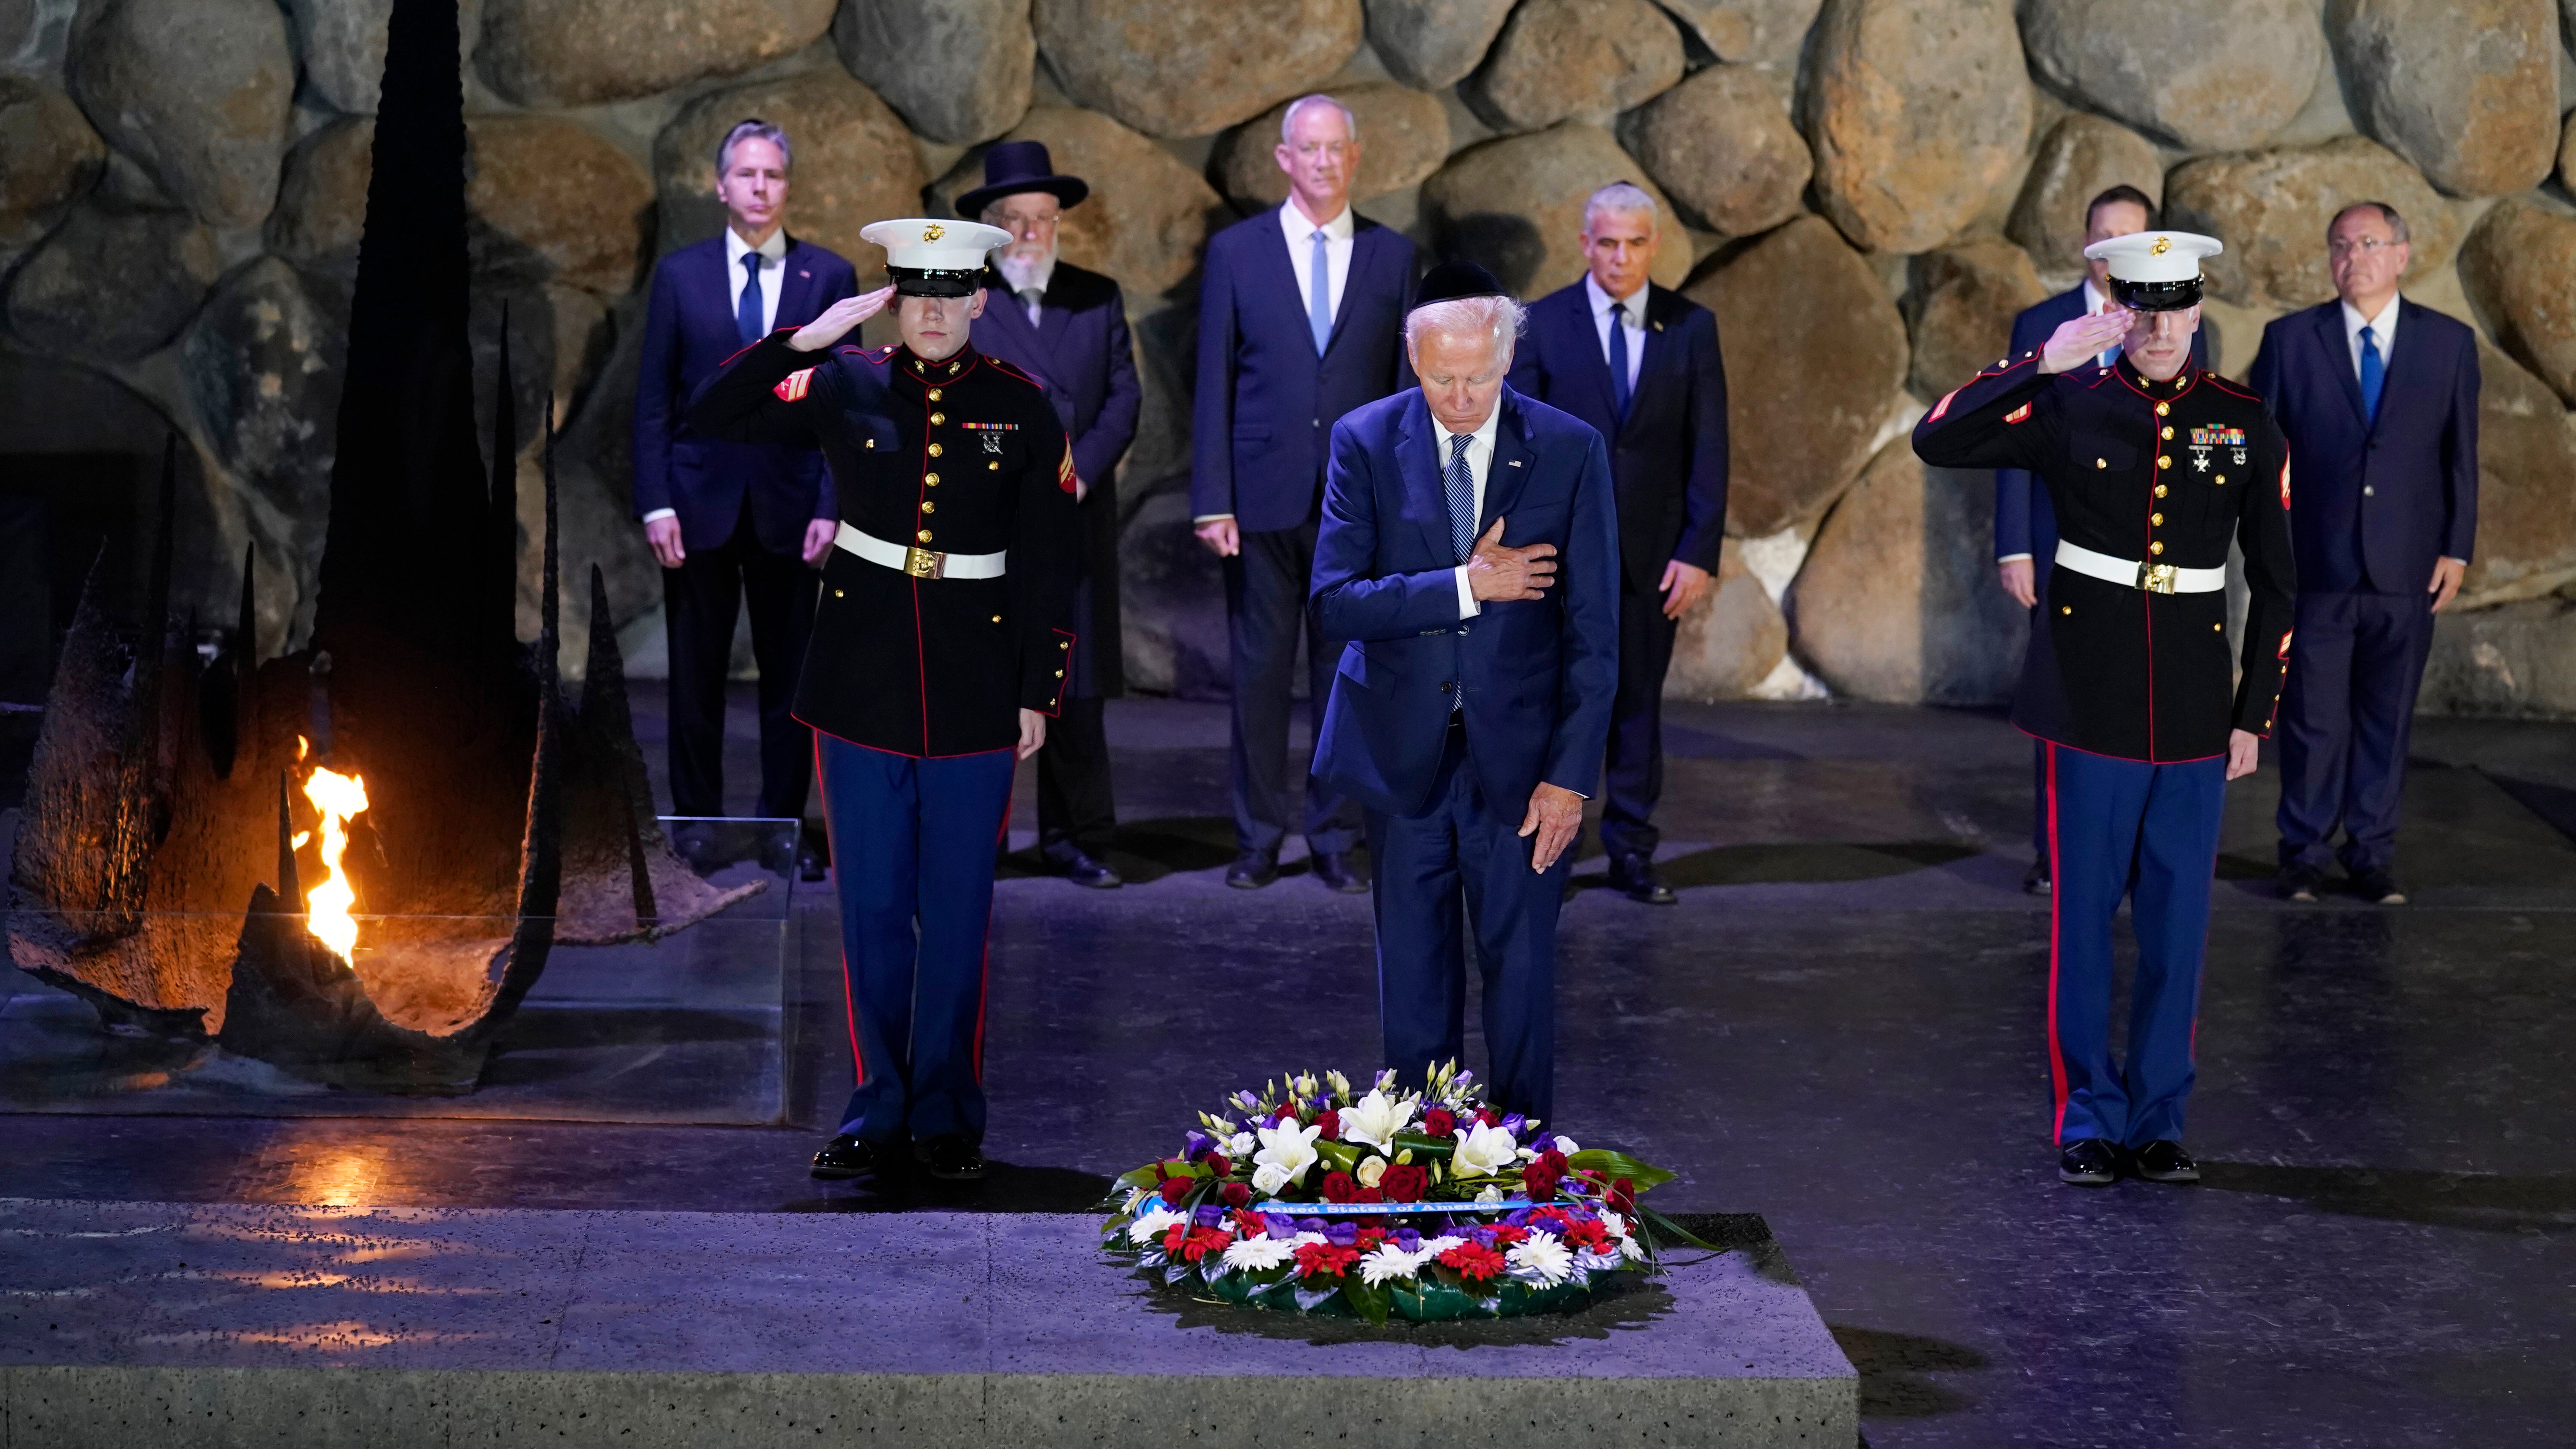 President Joe Biden, wearing a skullcap, participates in a wreath laying ceremony in the Hall of Remembrance at Yad Vashem